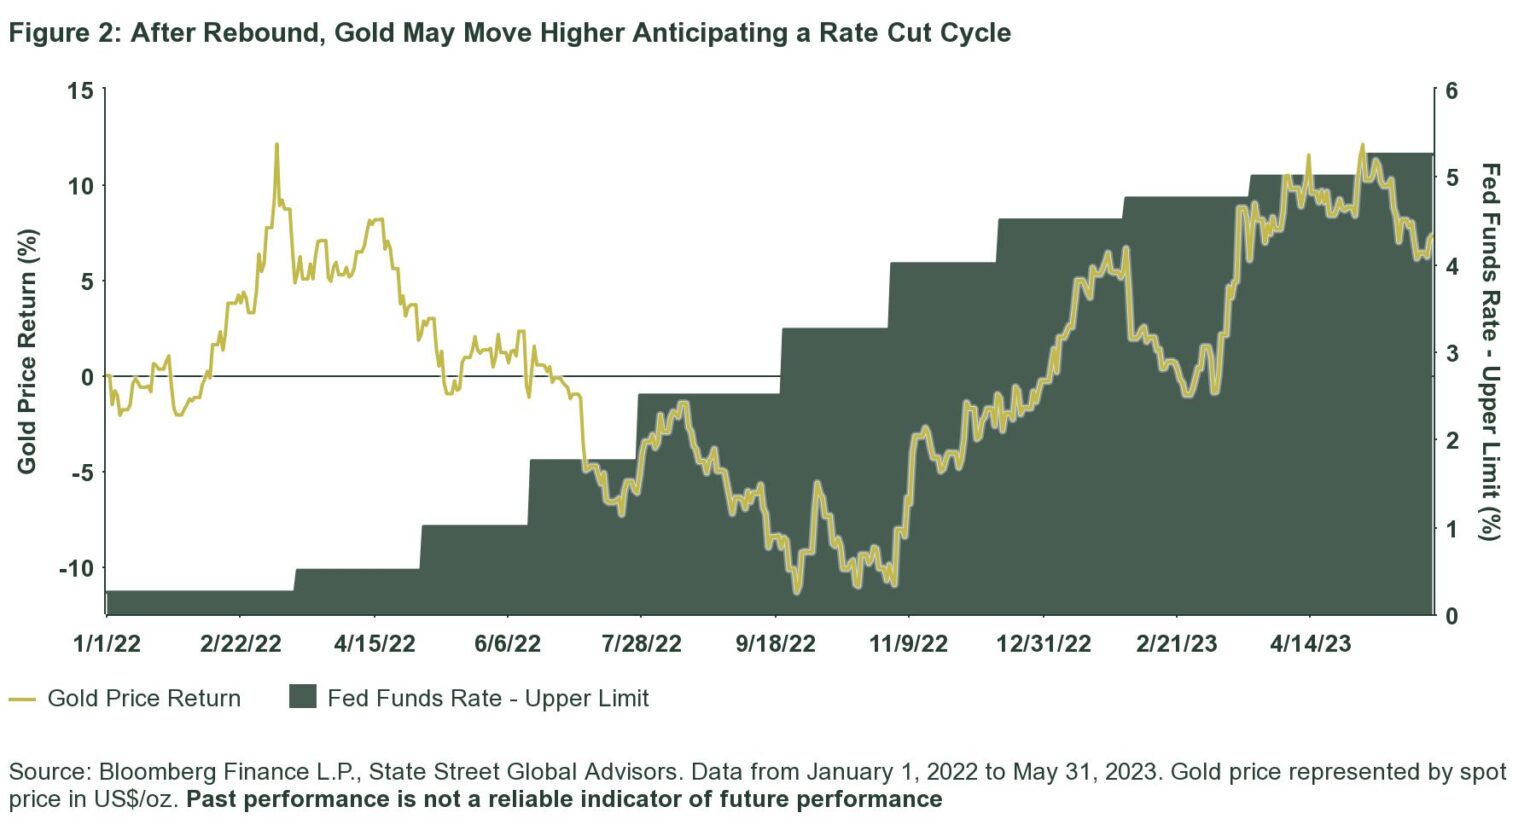 Gold Midyear Outlook: Interest Rates, Recession, and Risks Propel Gold Higher